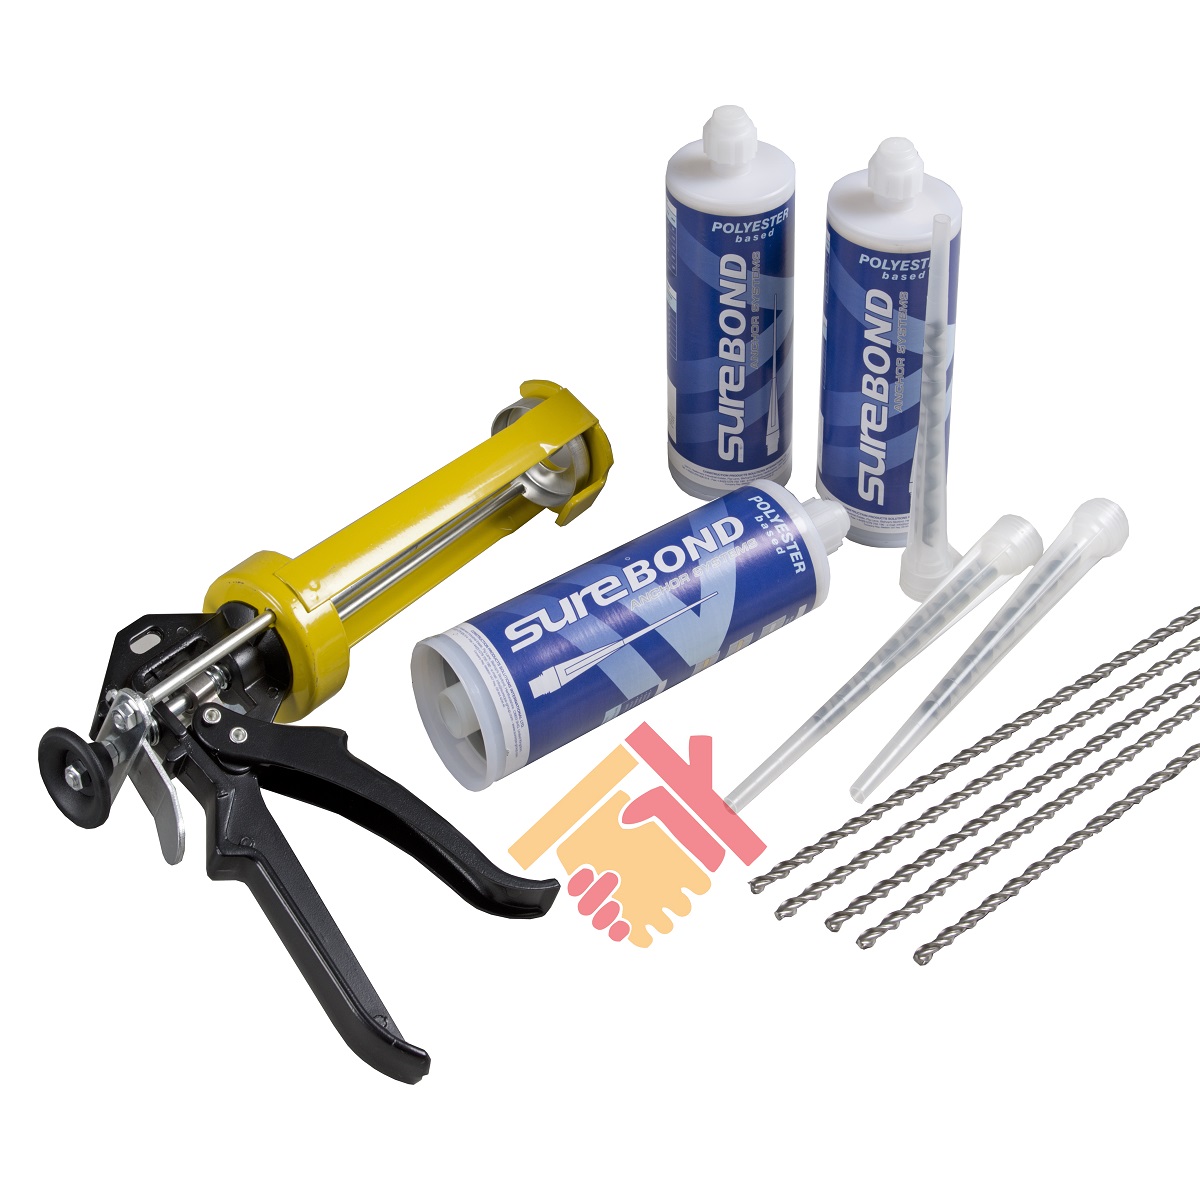 Helical Bar Polyester Resin Crack Stitch Repair Kit